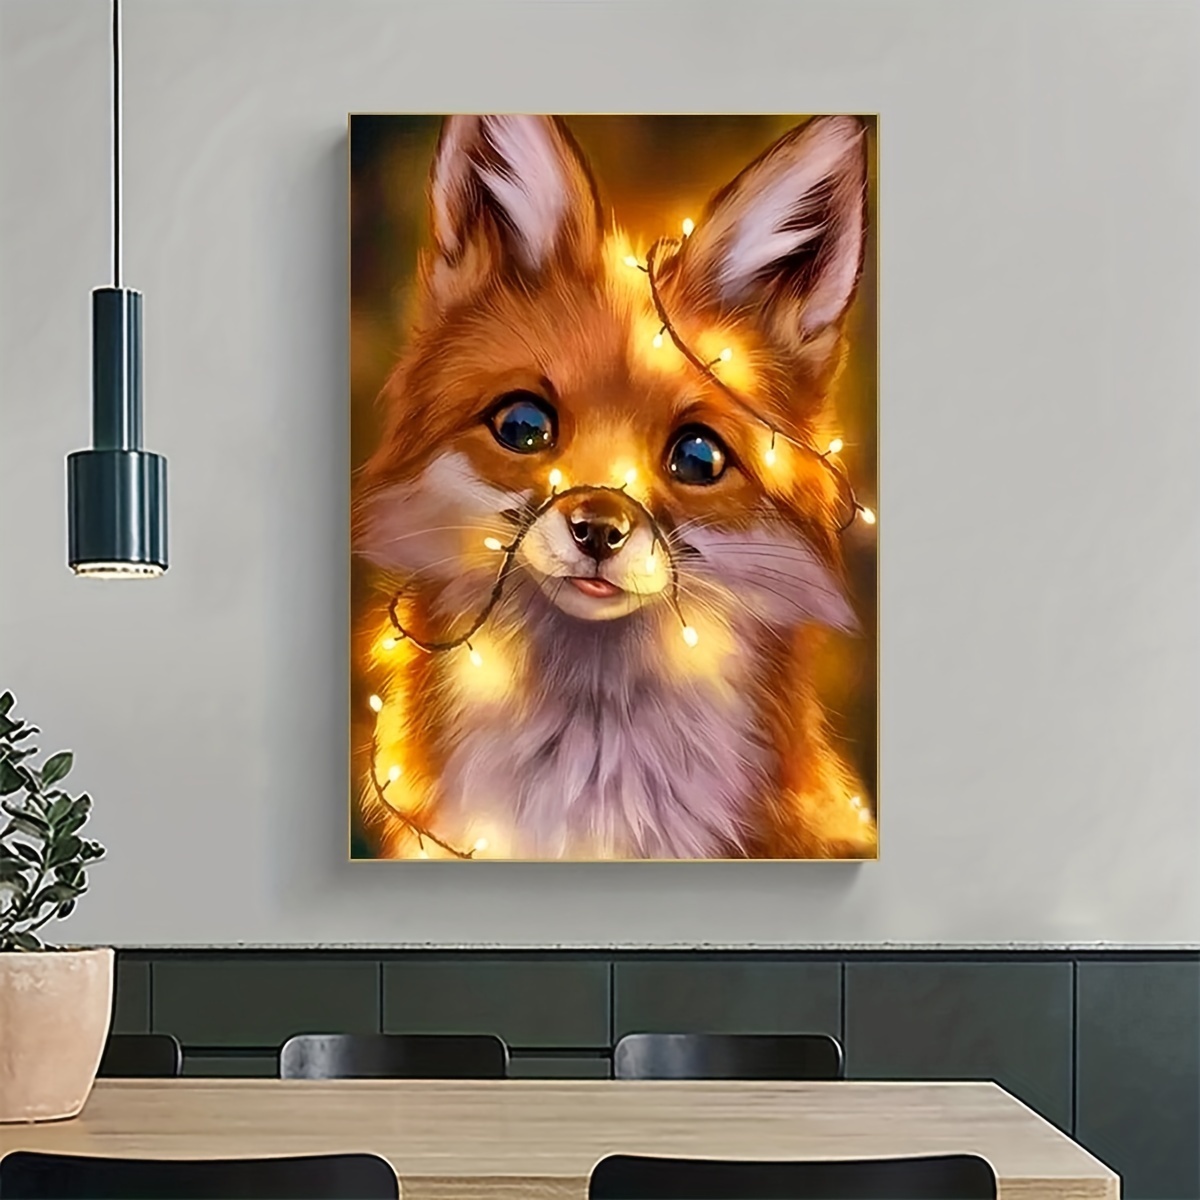 5D Diamond Painting Two Fall Leaf Foxes Kit